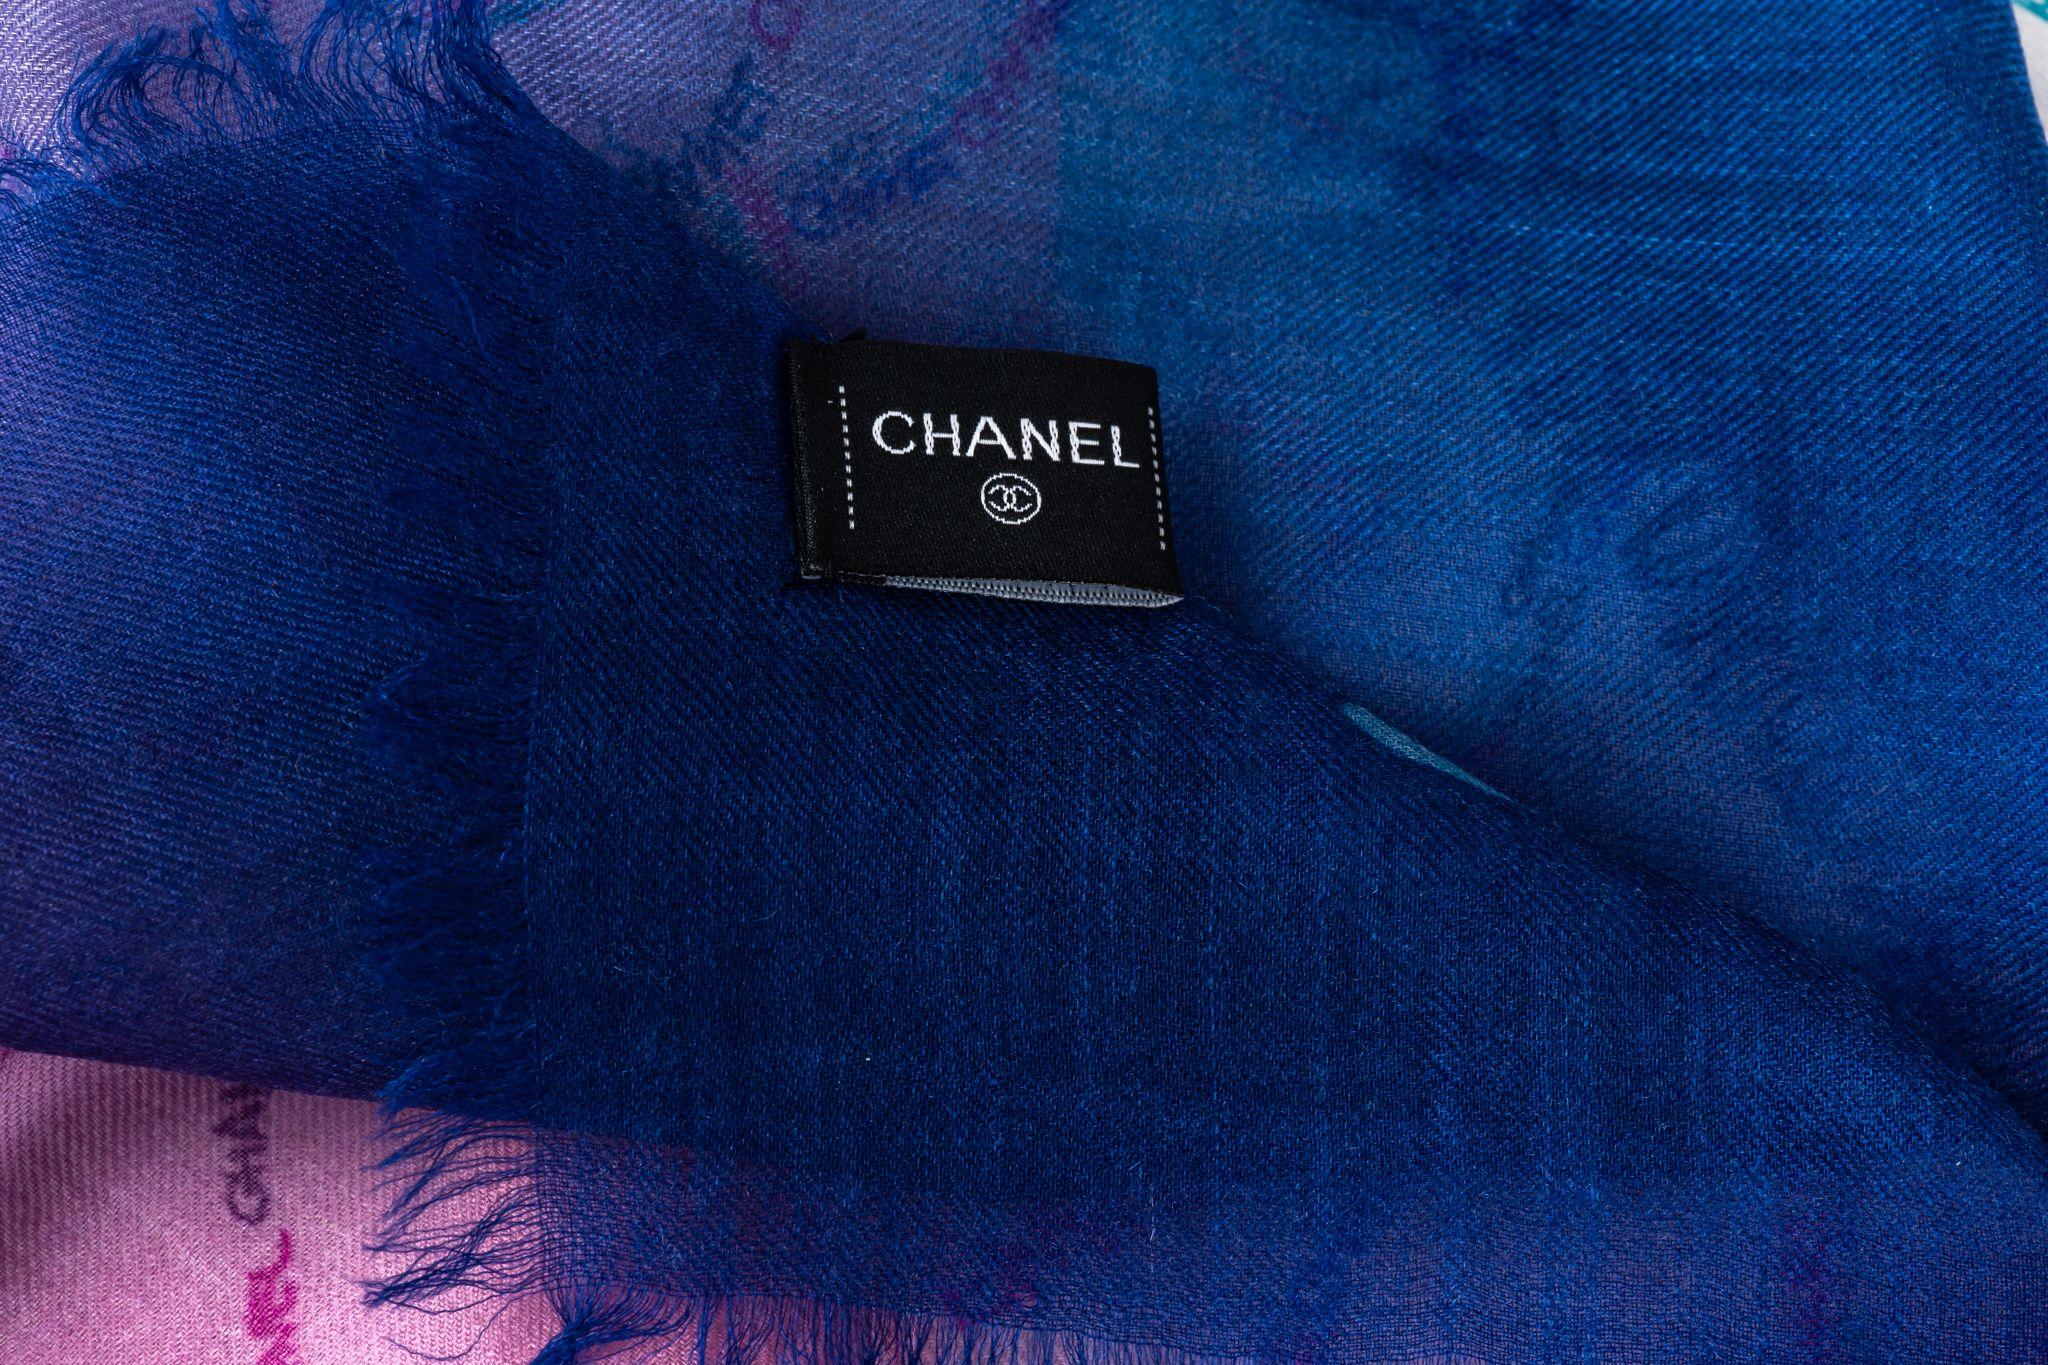 Chanel new cashmere shawl in degrade fuchsia -red . Camellia drawings. Care tag attached